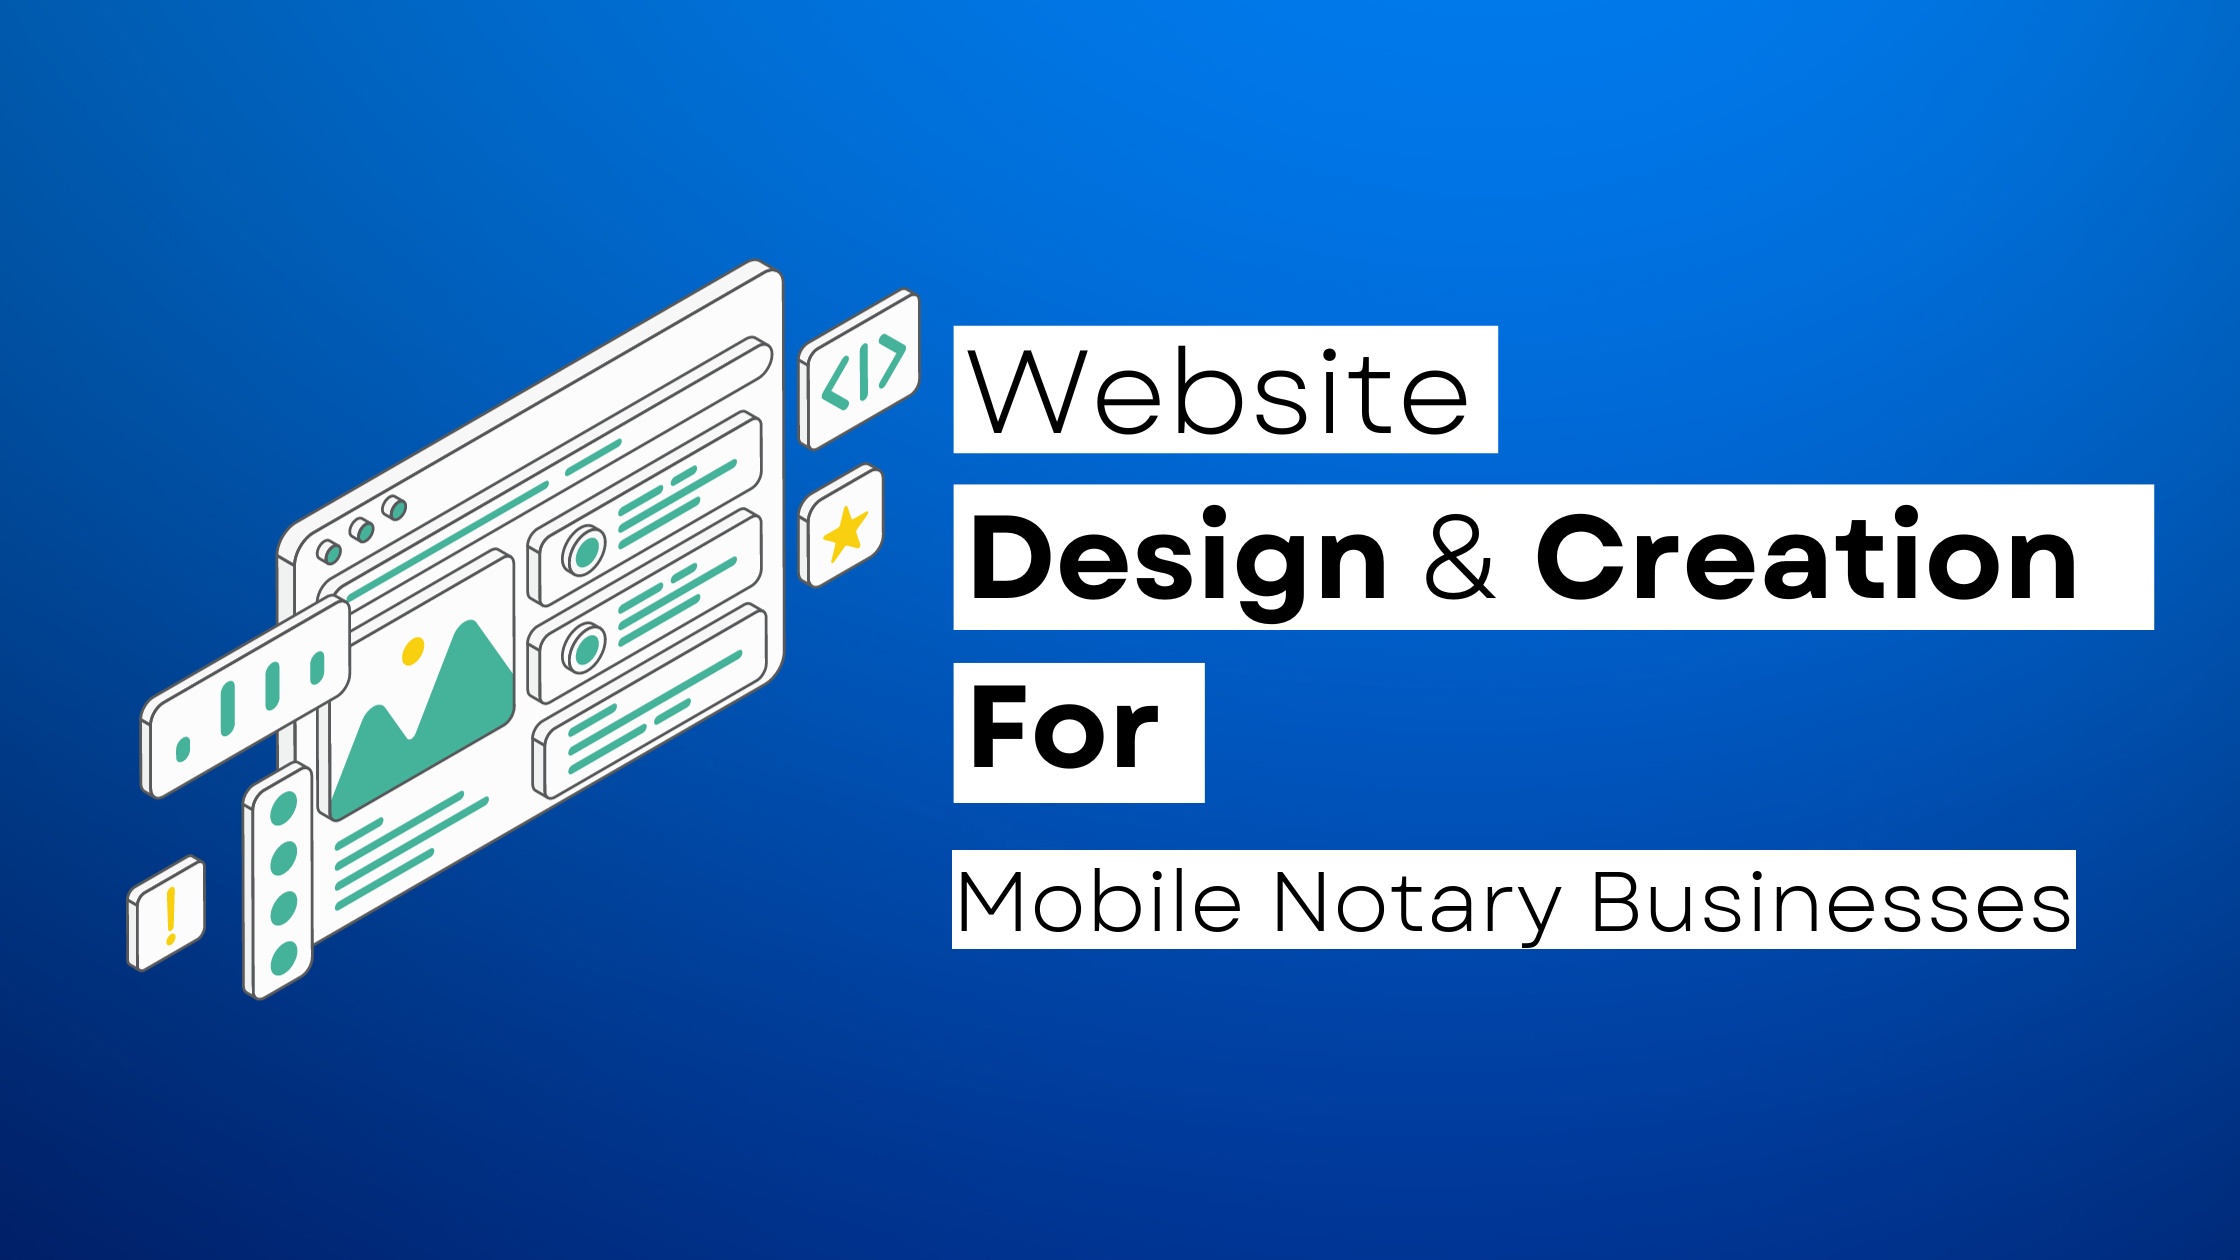 How to start a Mobile Notary website